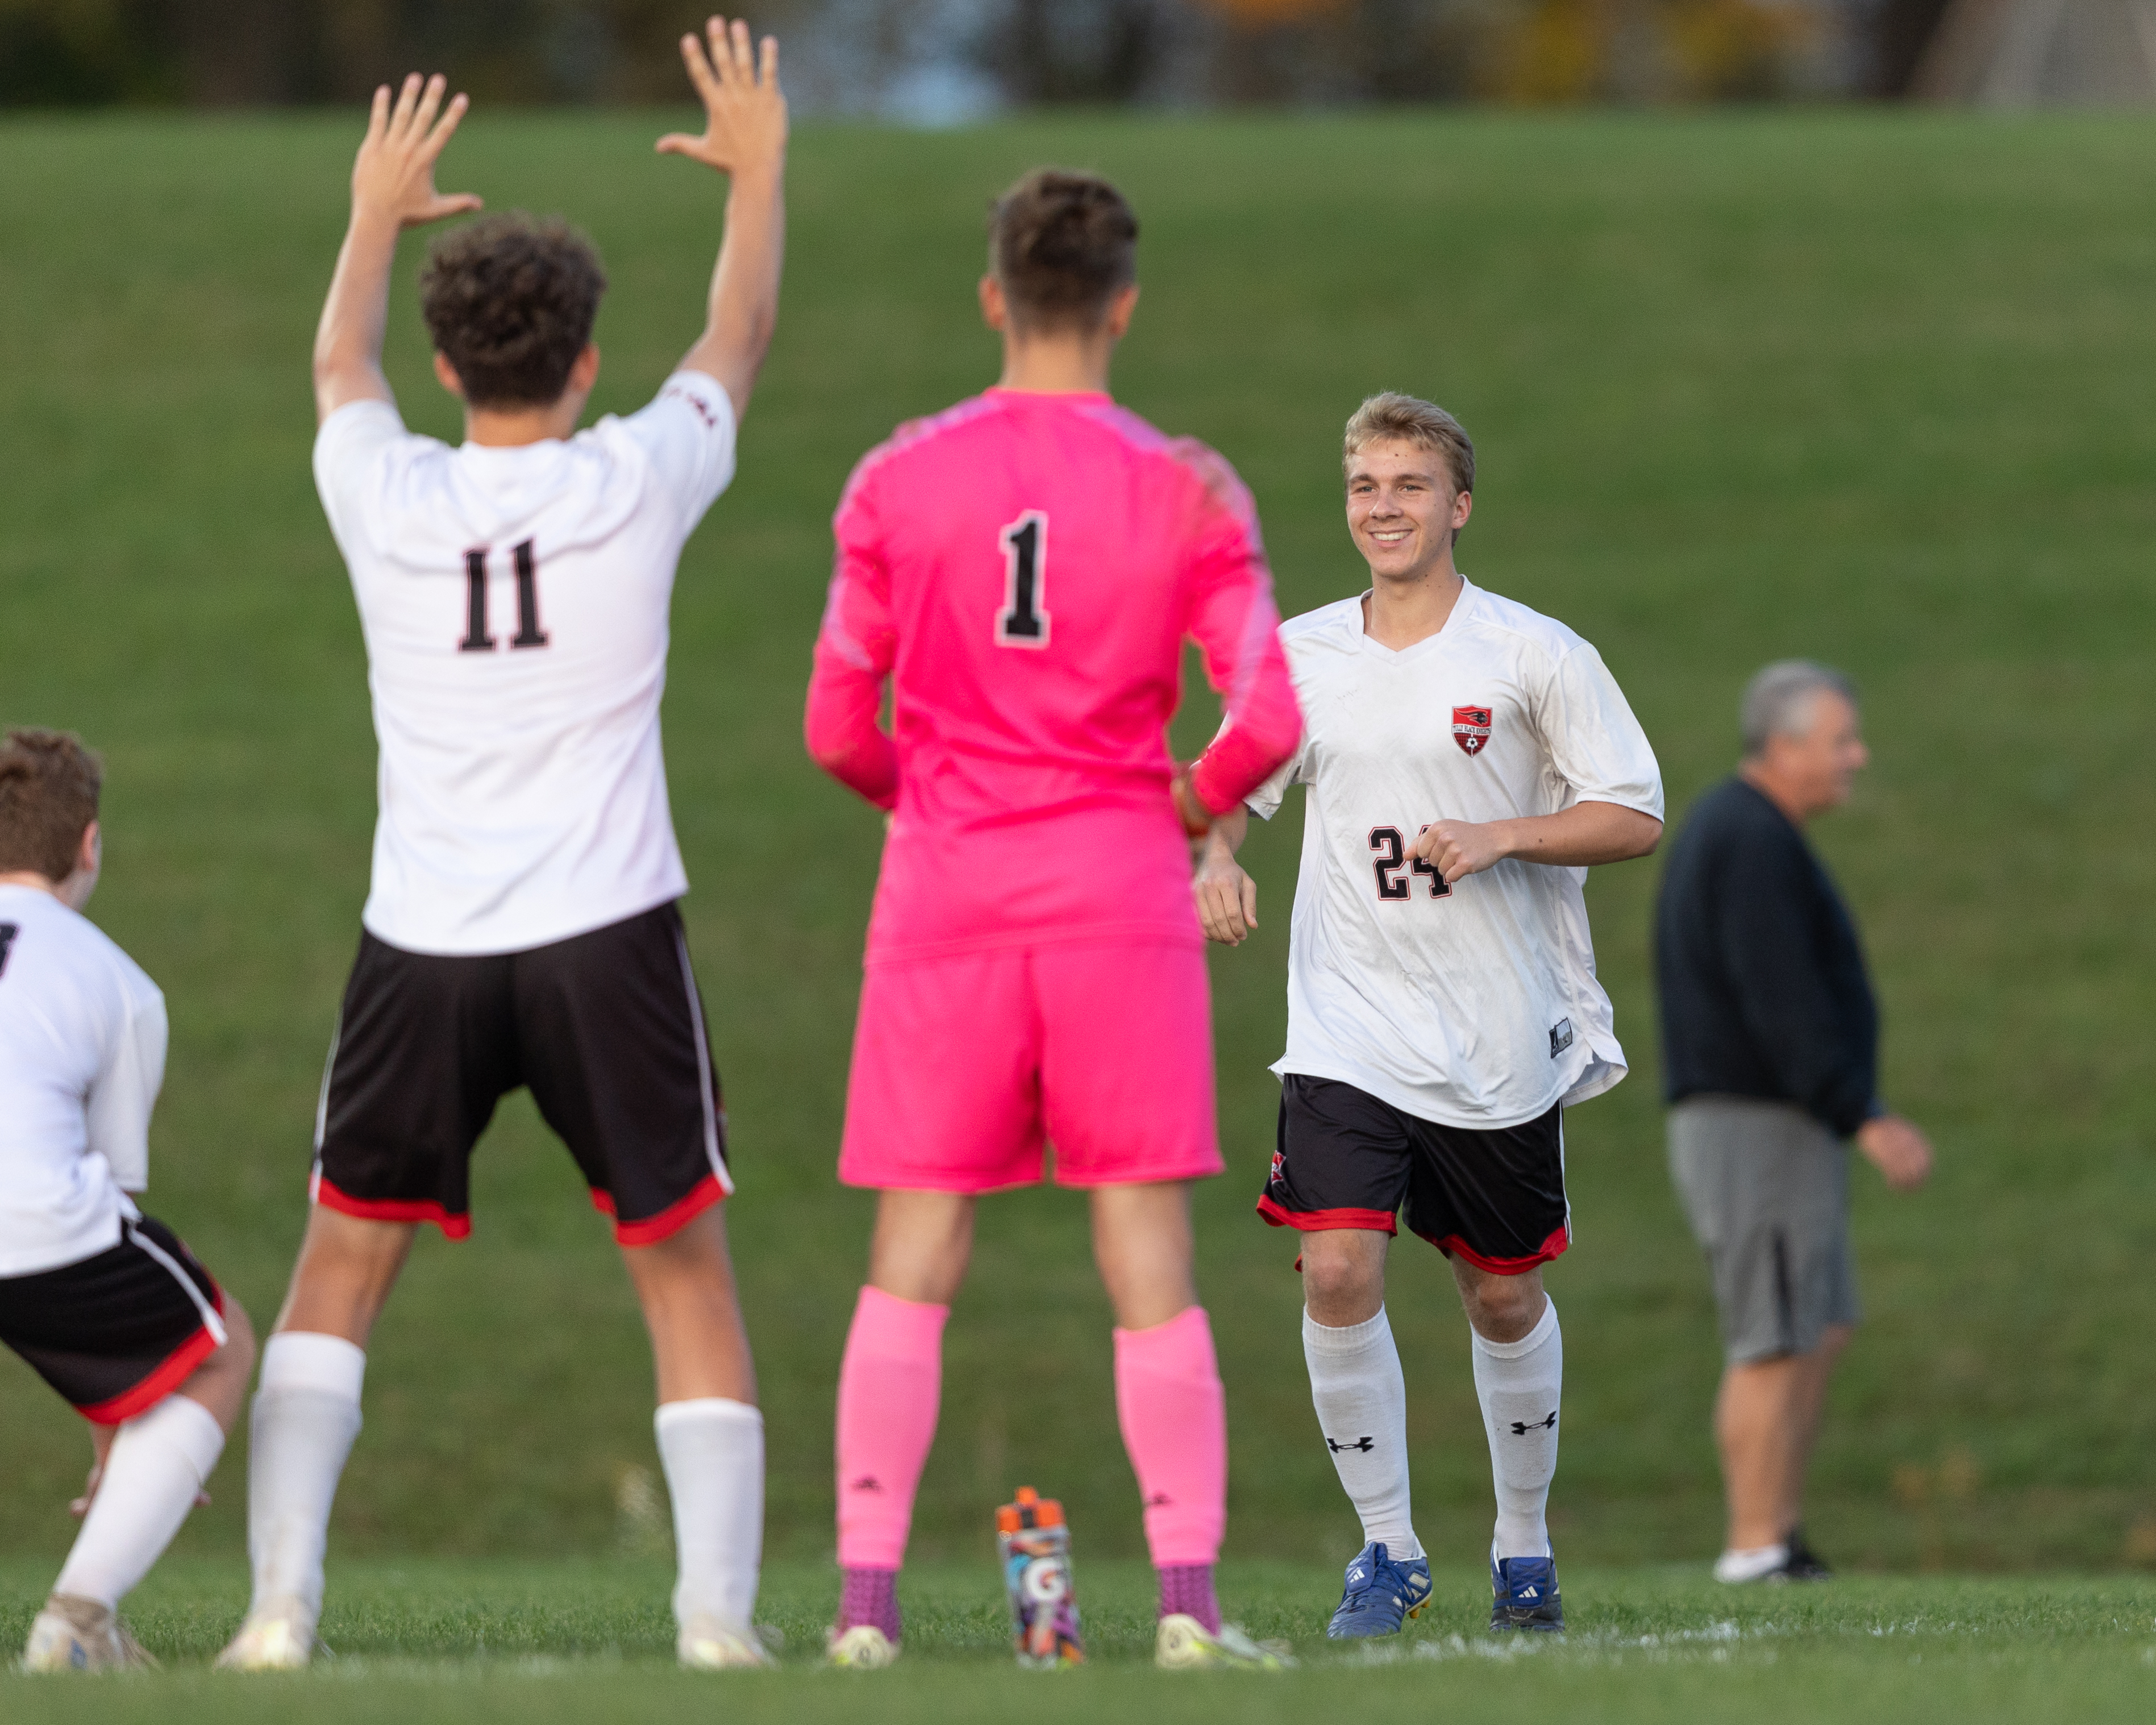 York advances to first state boys soccer championship game – Daily